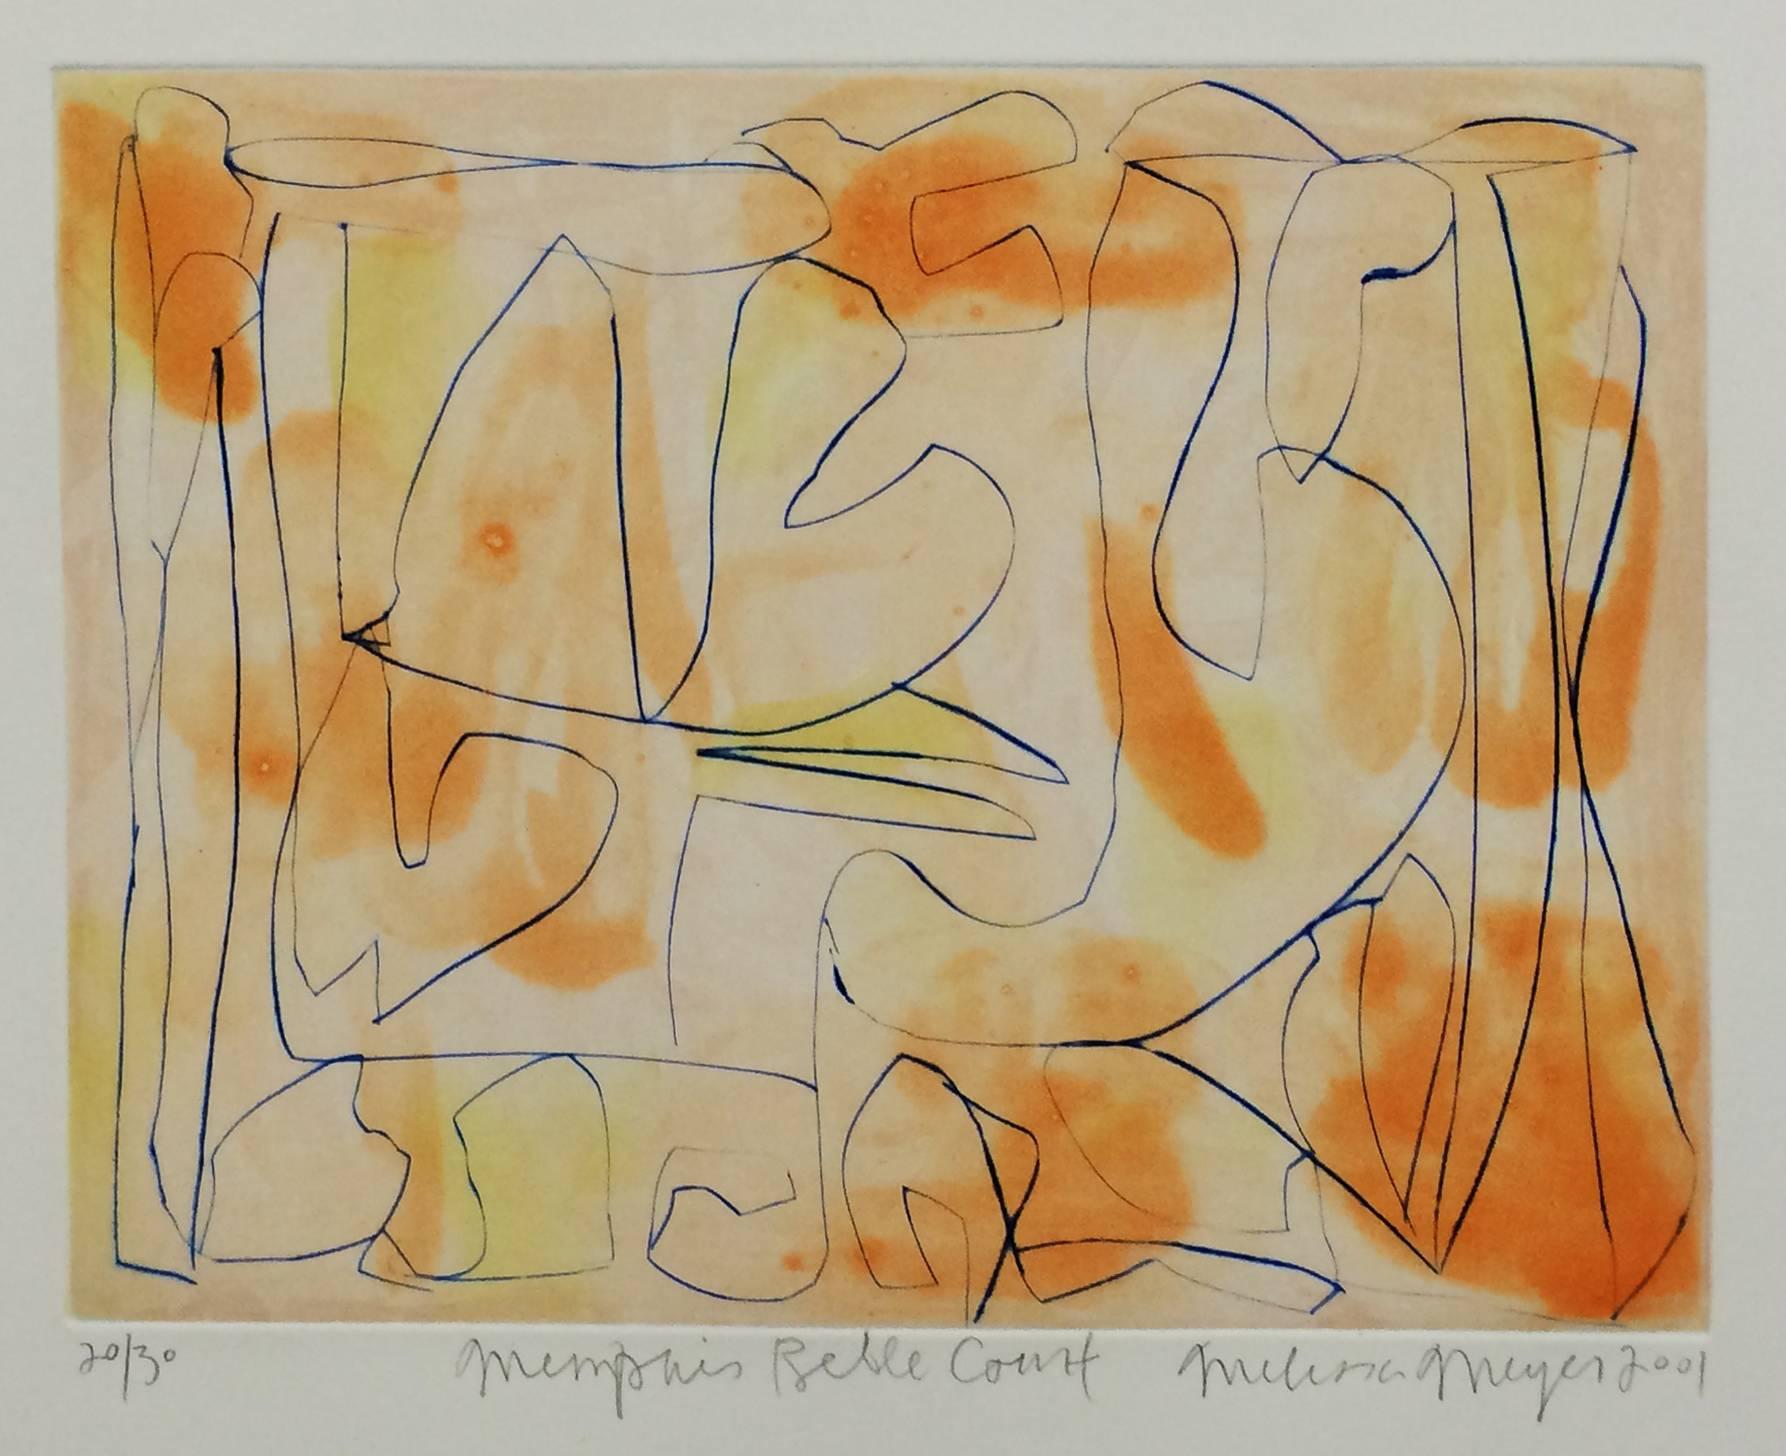 Memphis belle court - Abstract Expressionist Print by Melissa Meyer